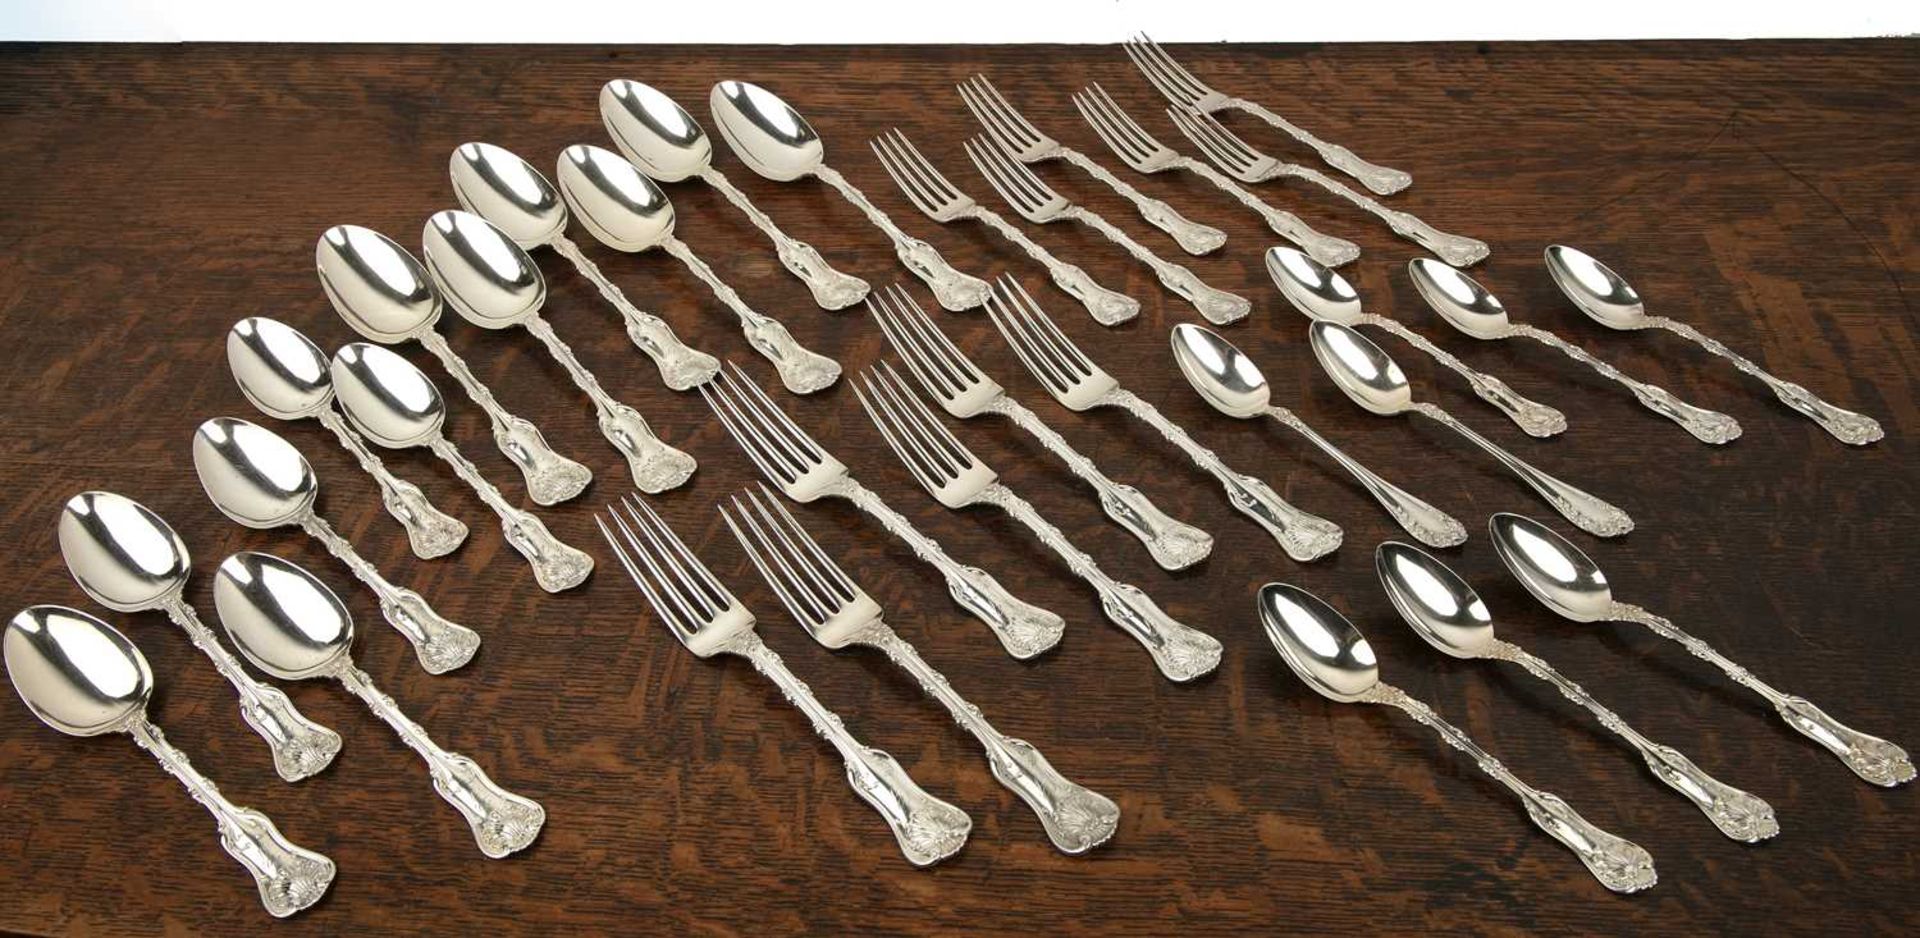 Collection of sterling silver cutlery comprising of: six large forks, six smaller forks, six large